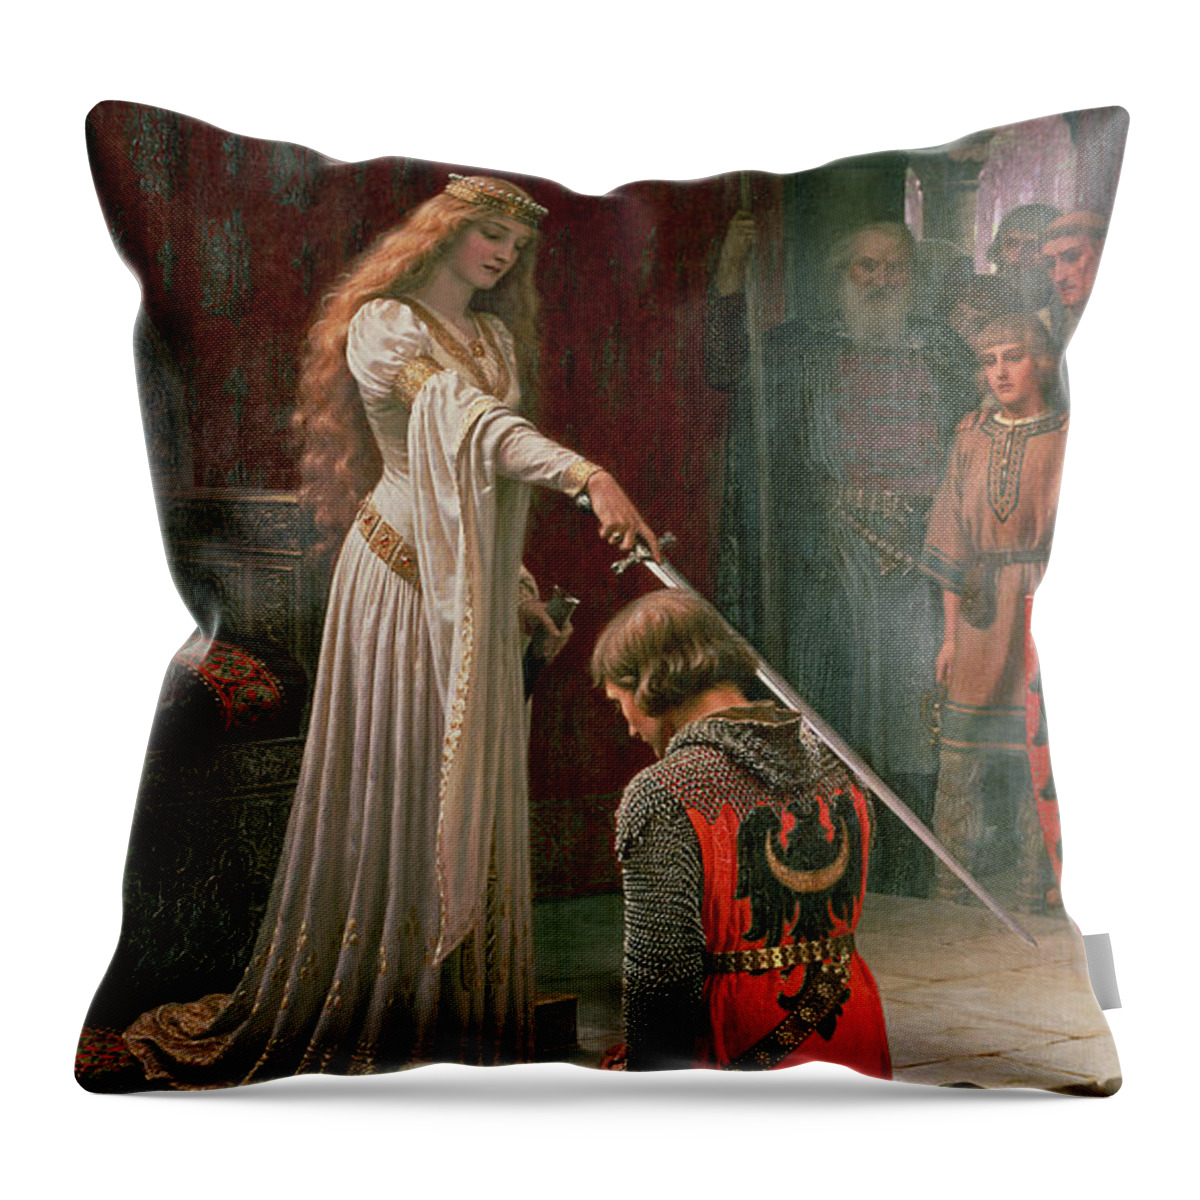 The Throw Pillow featuring the painting The Accolade by Edmund Blair Leighton